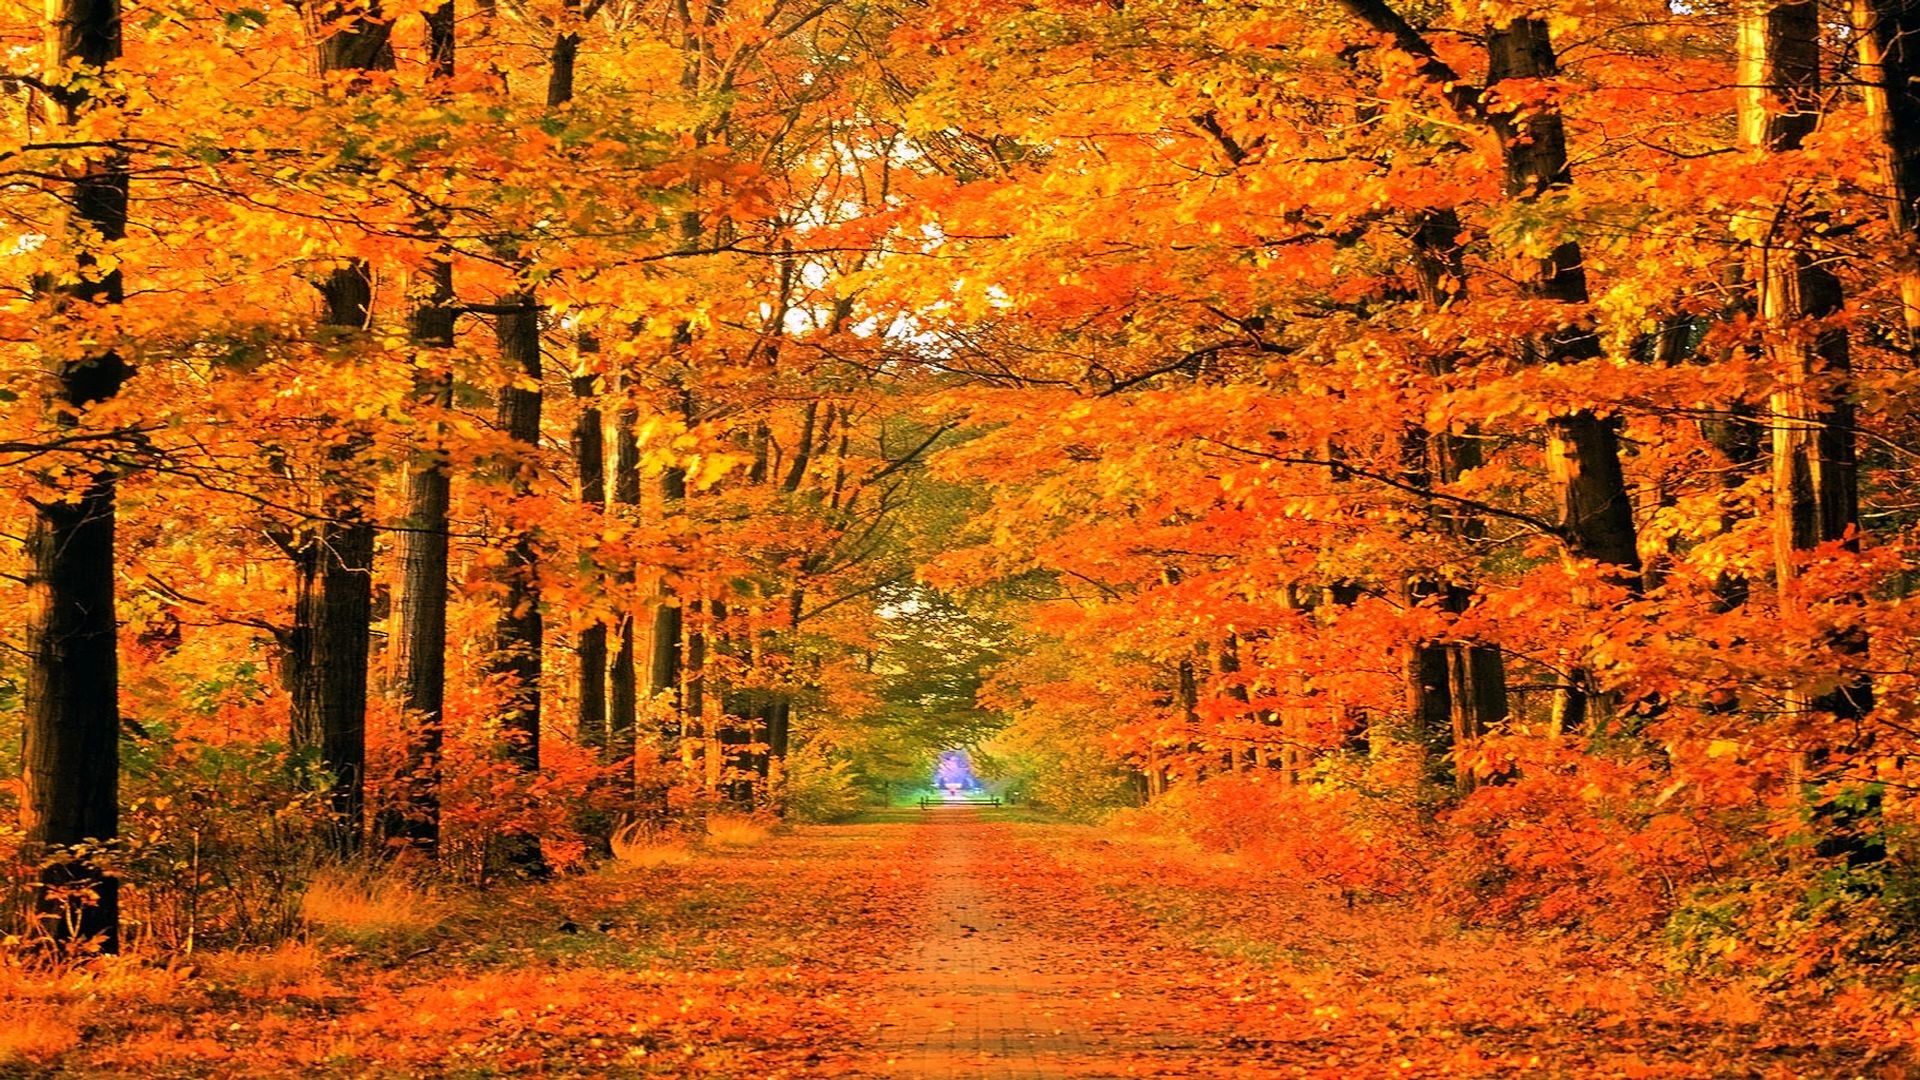 The Autumn Wallpaper Here Are All About Colorful Leaves, Computer Background